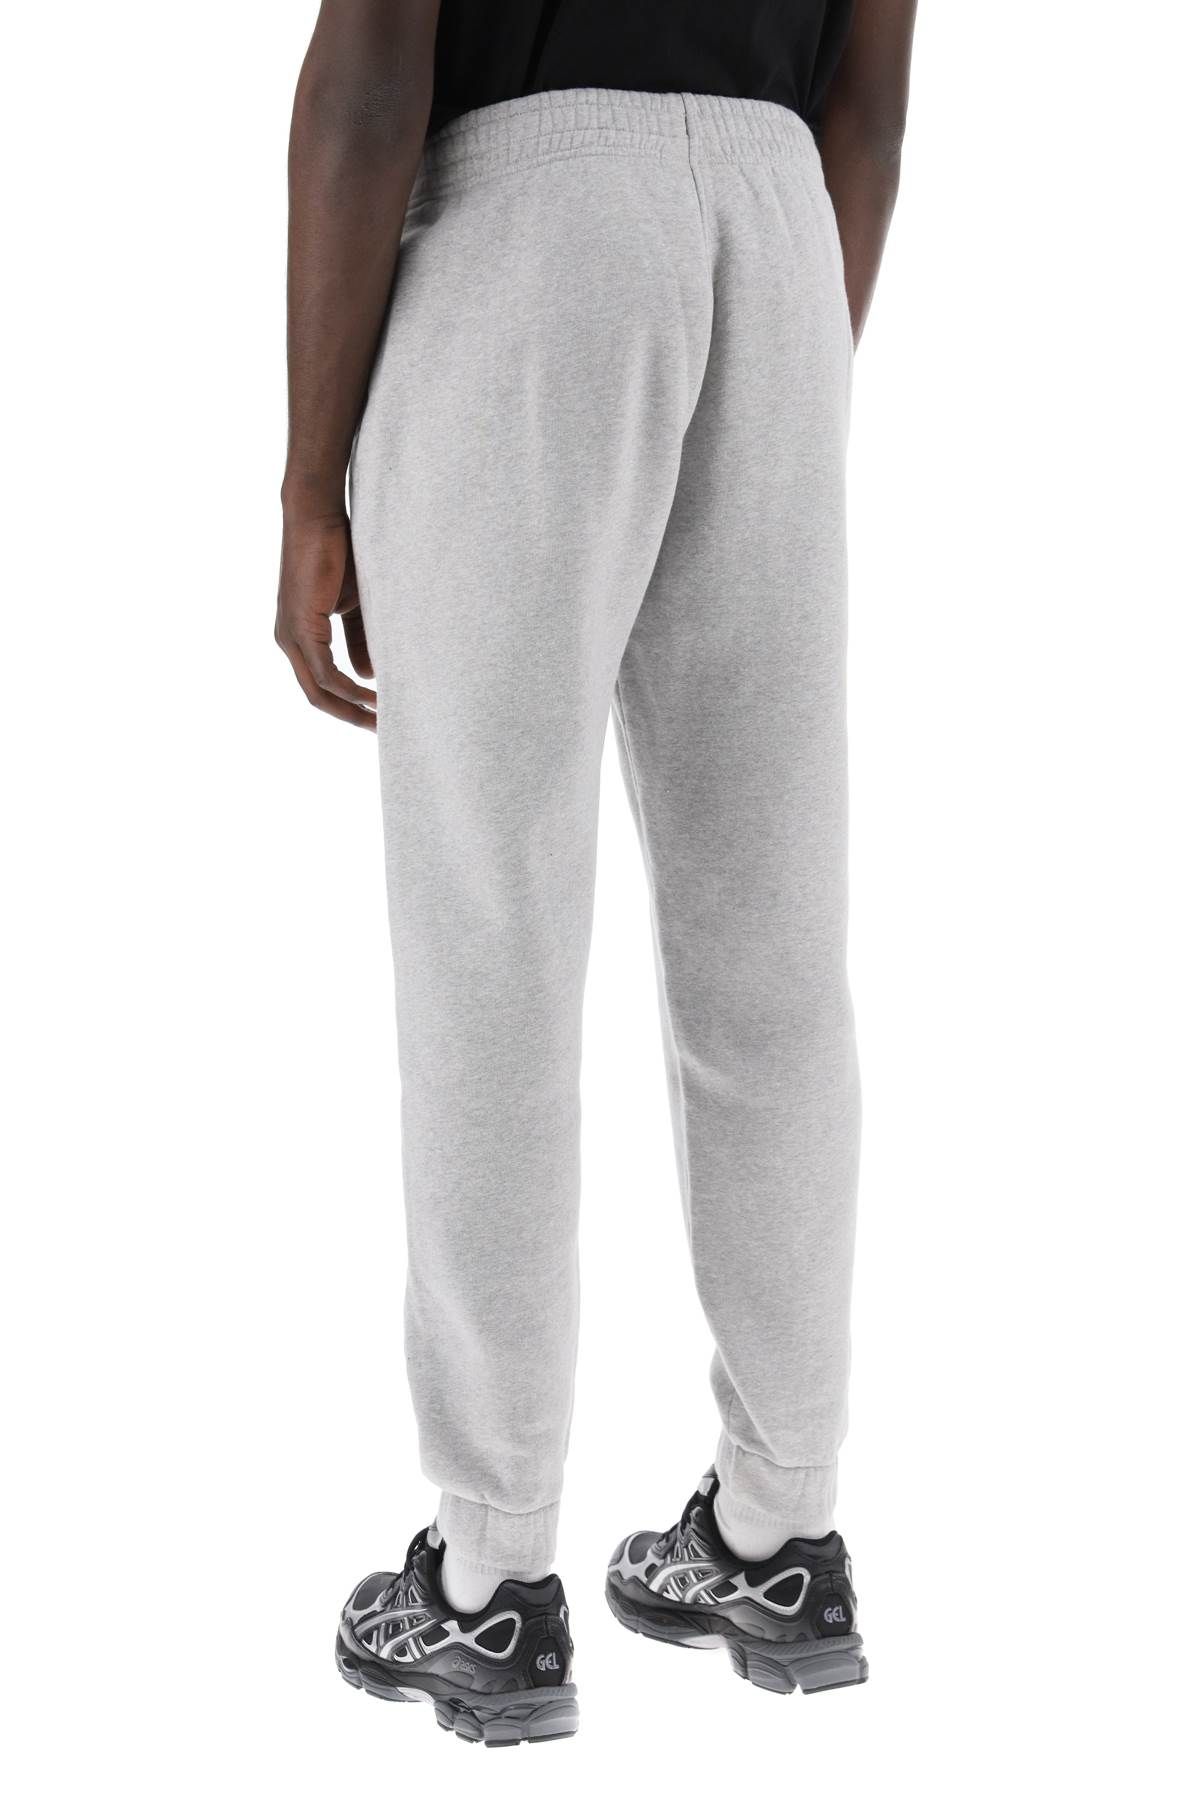 Shop Maison Kitsuné "sporty Pants With Handwriting In Grey